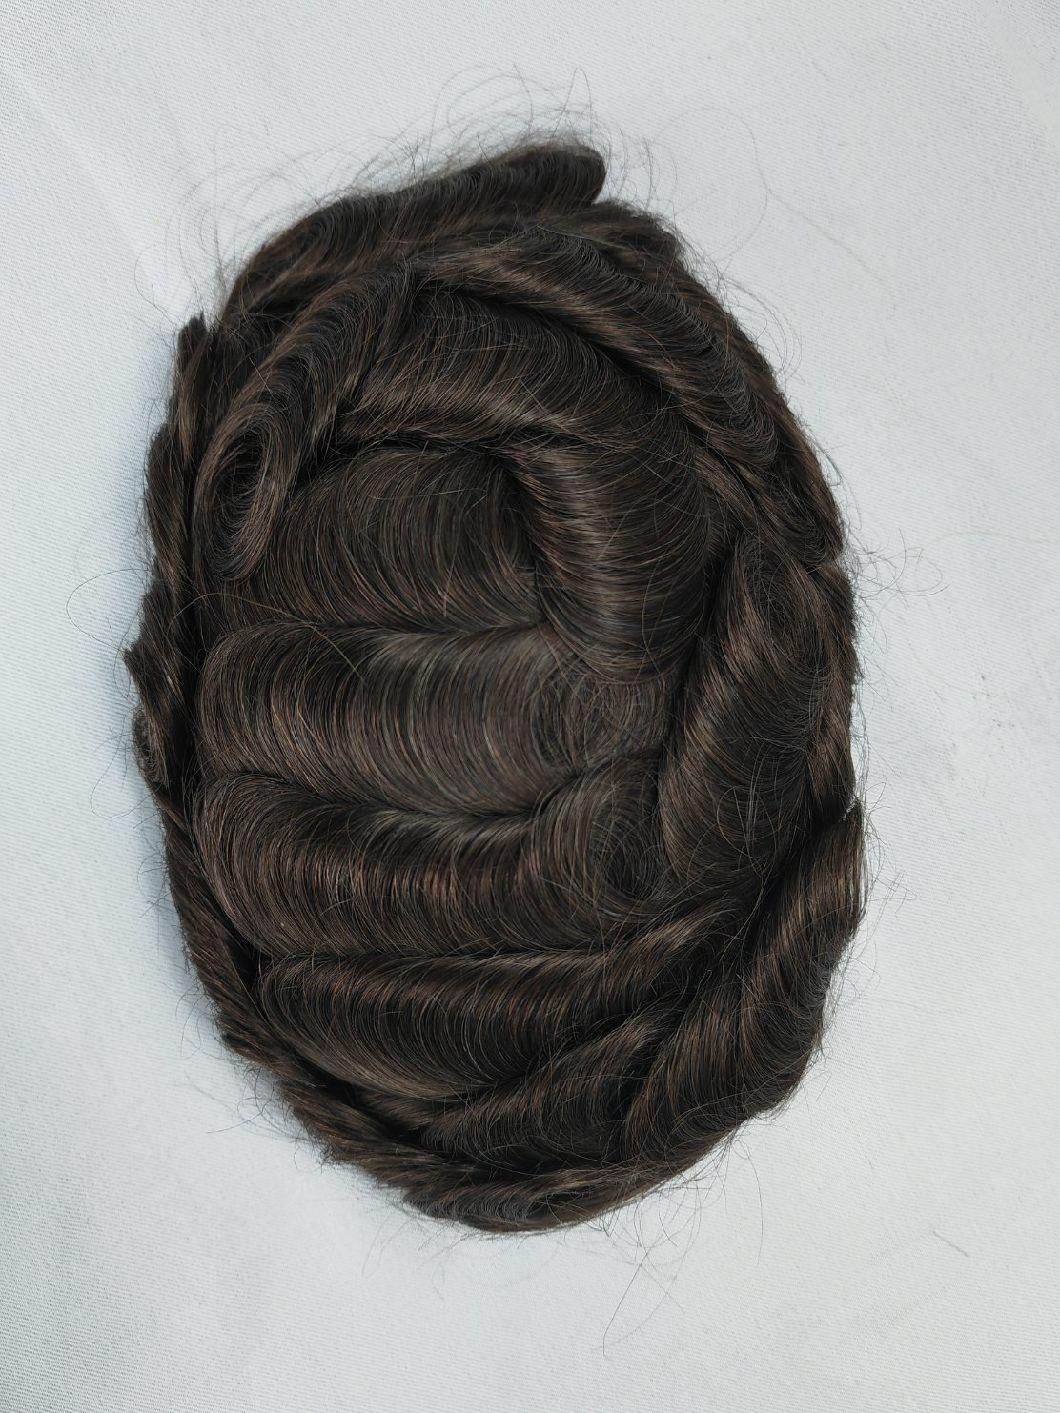 2022 Best Hand Knotted Natural Fine Mono Base Human Hair System Made of Remy Human Hair